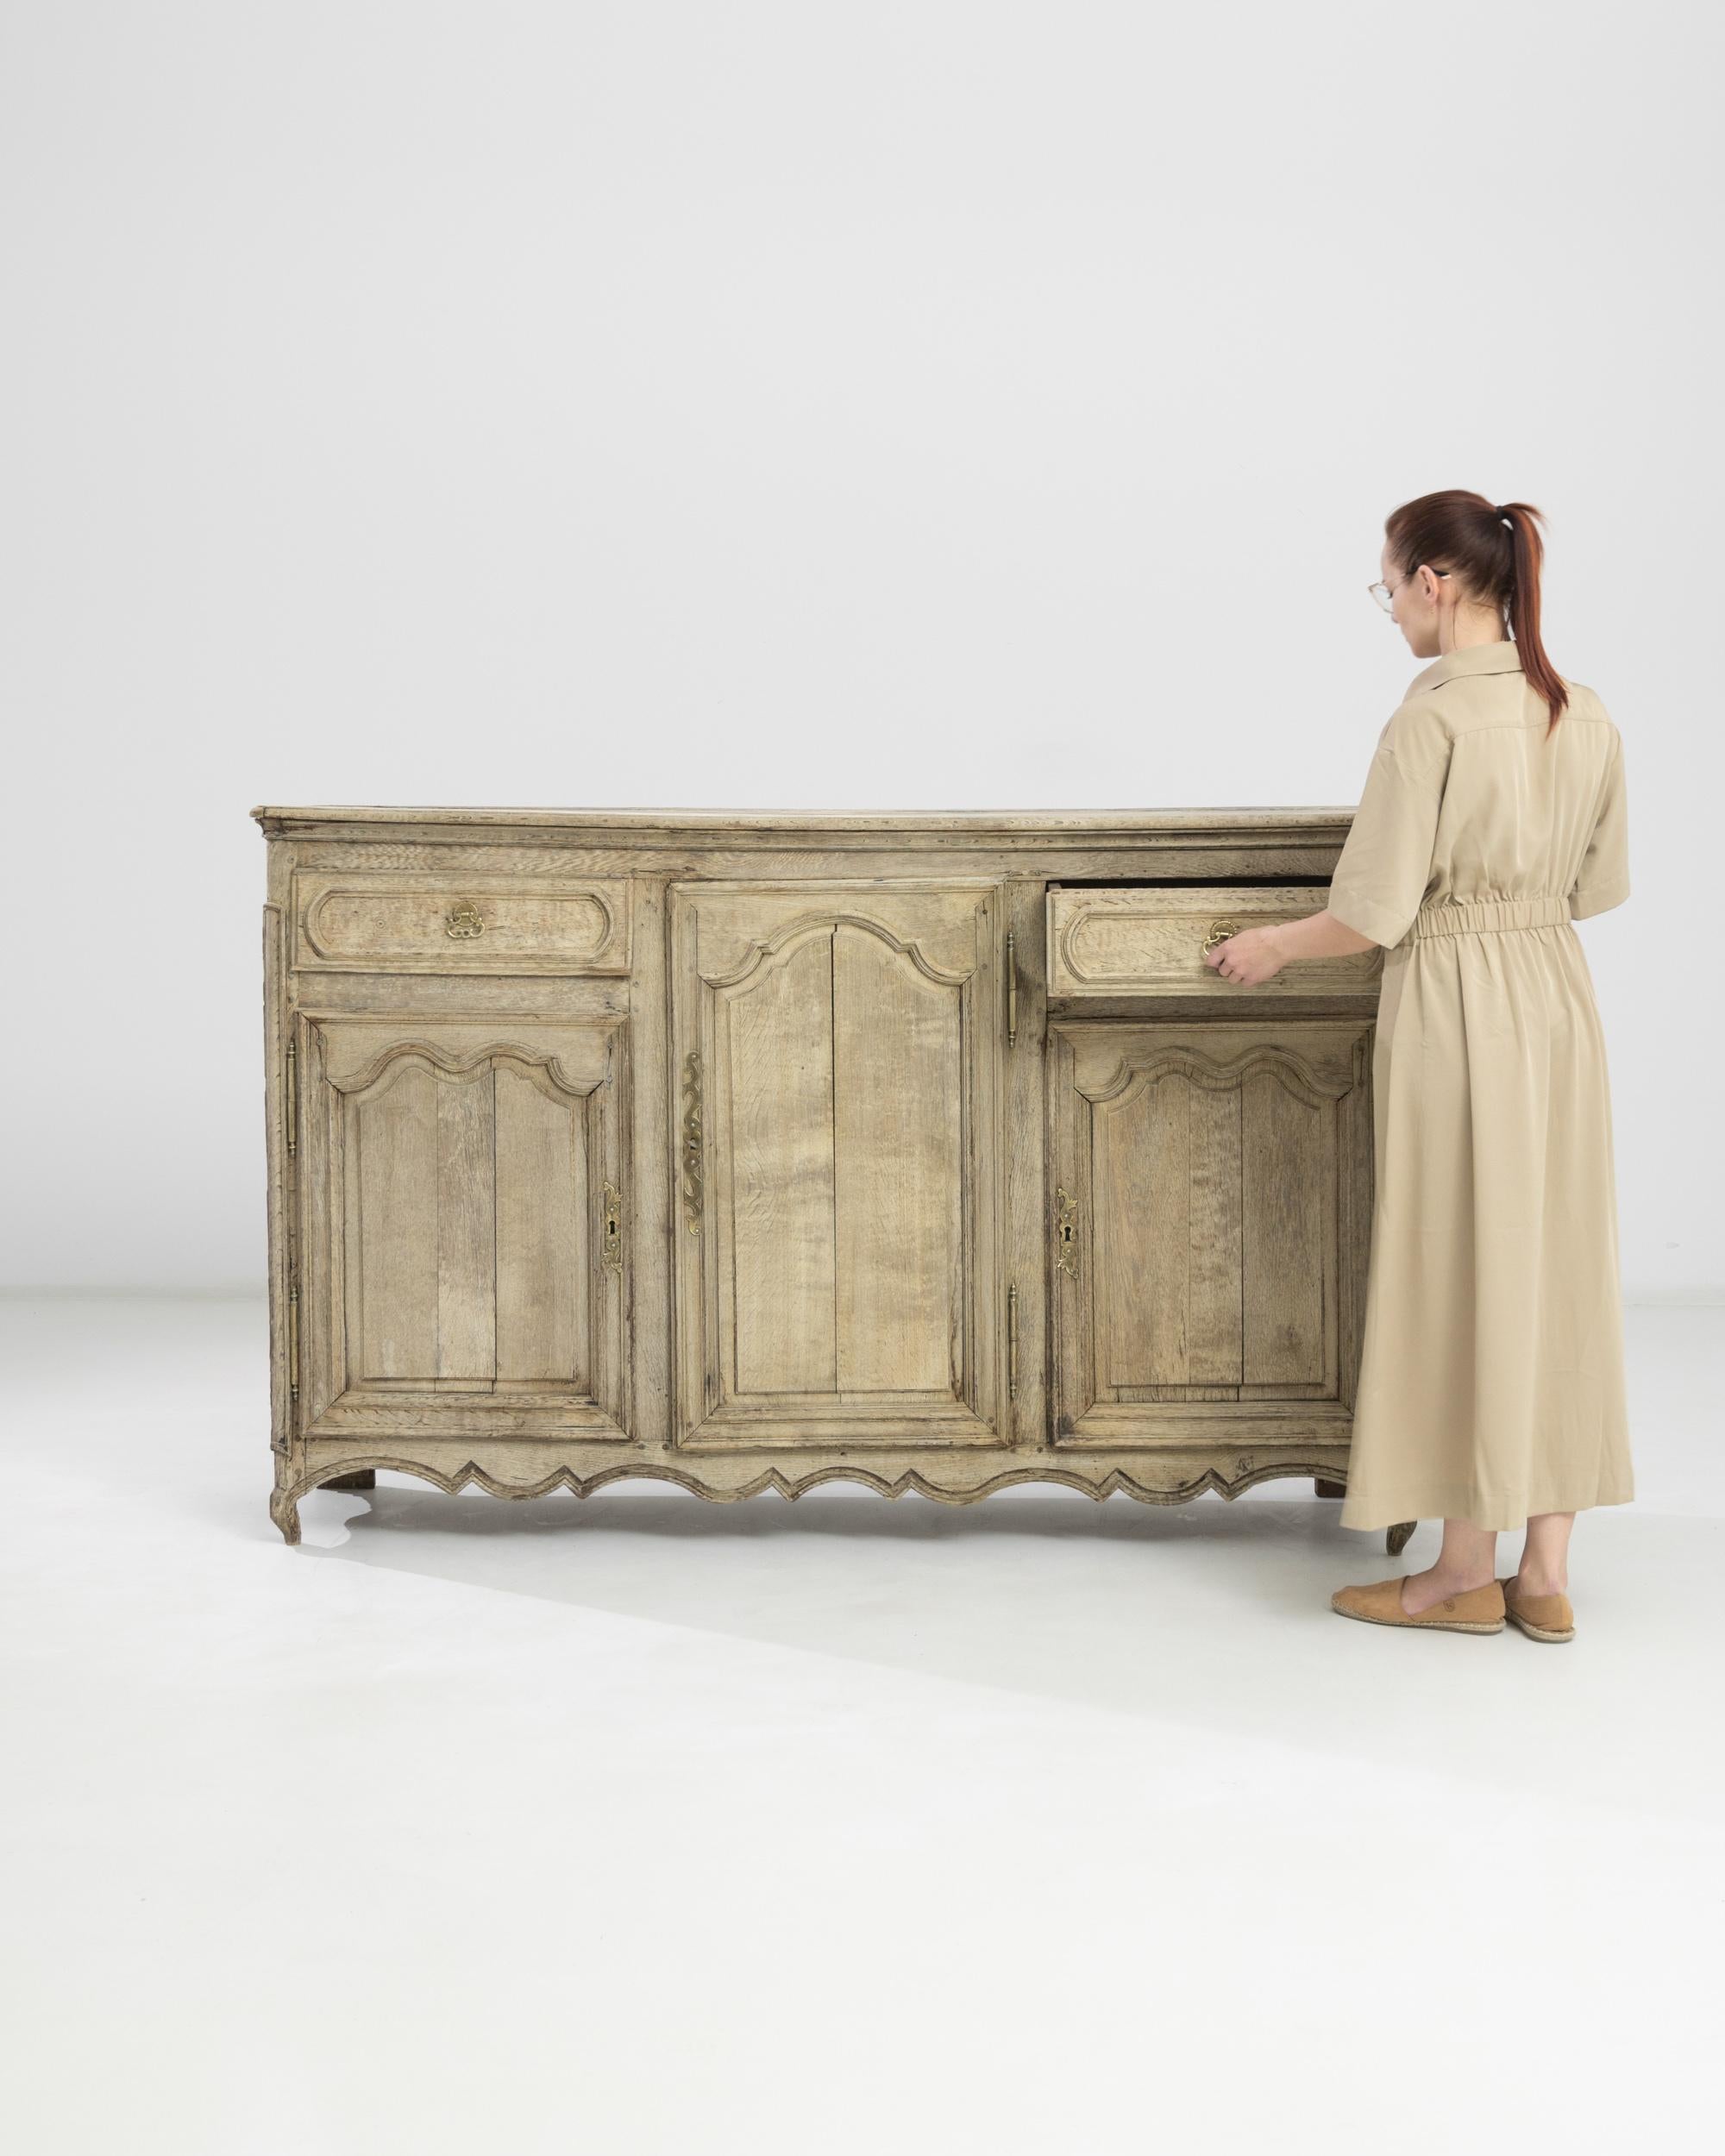 Crafted in France circa 1860, this bleached oak buffet flaunts gentle curvilinear arch carvings on the raised doors, echoed in the waves of the scalloped apron and the bend of its miniature convex legs. The original gilded hardware of the drawers